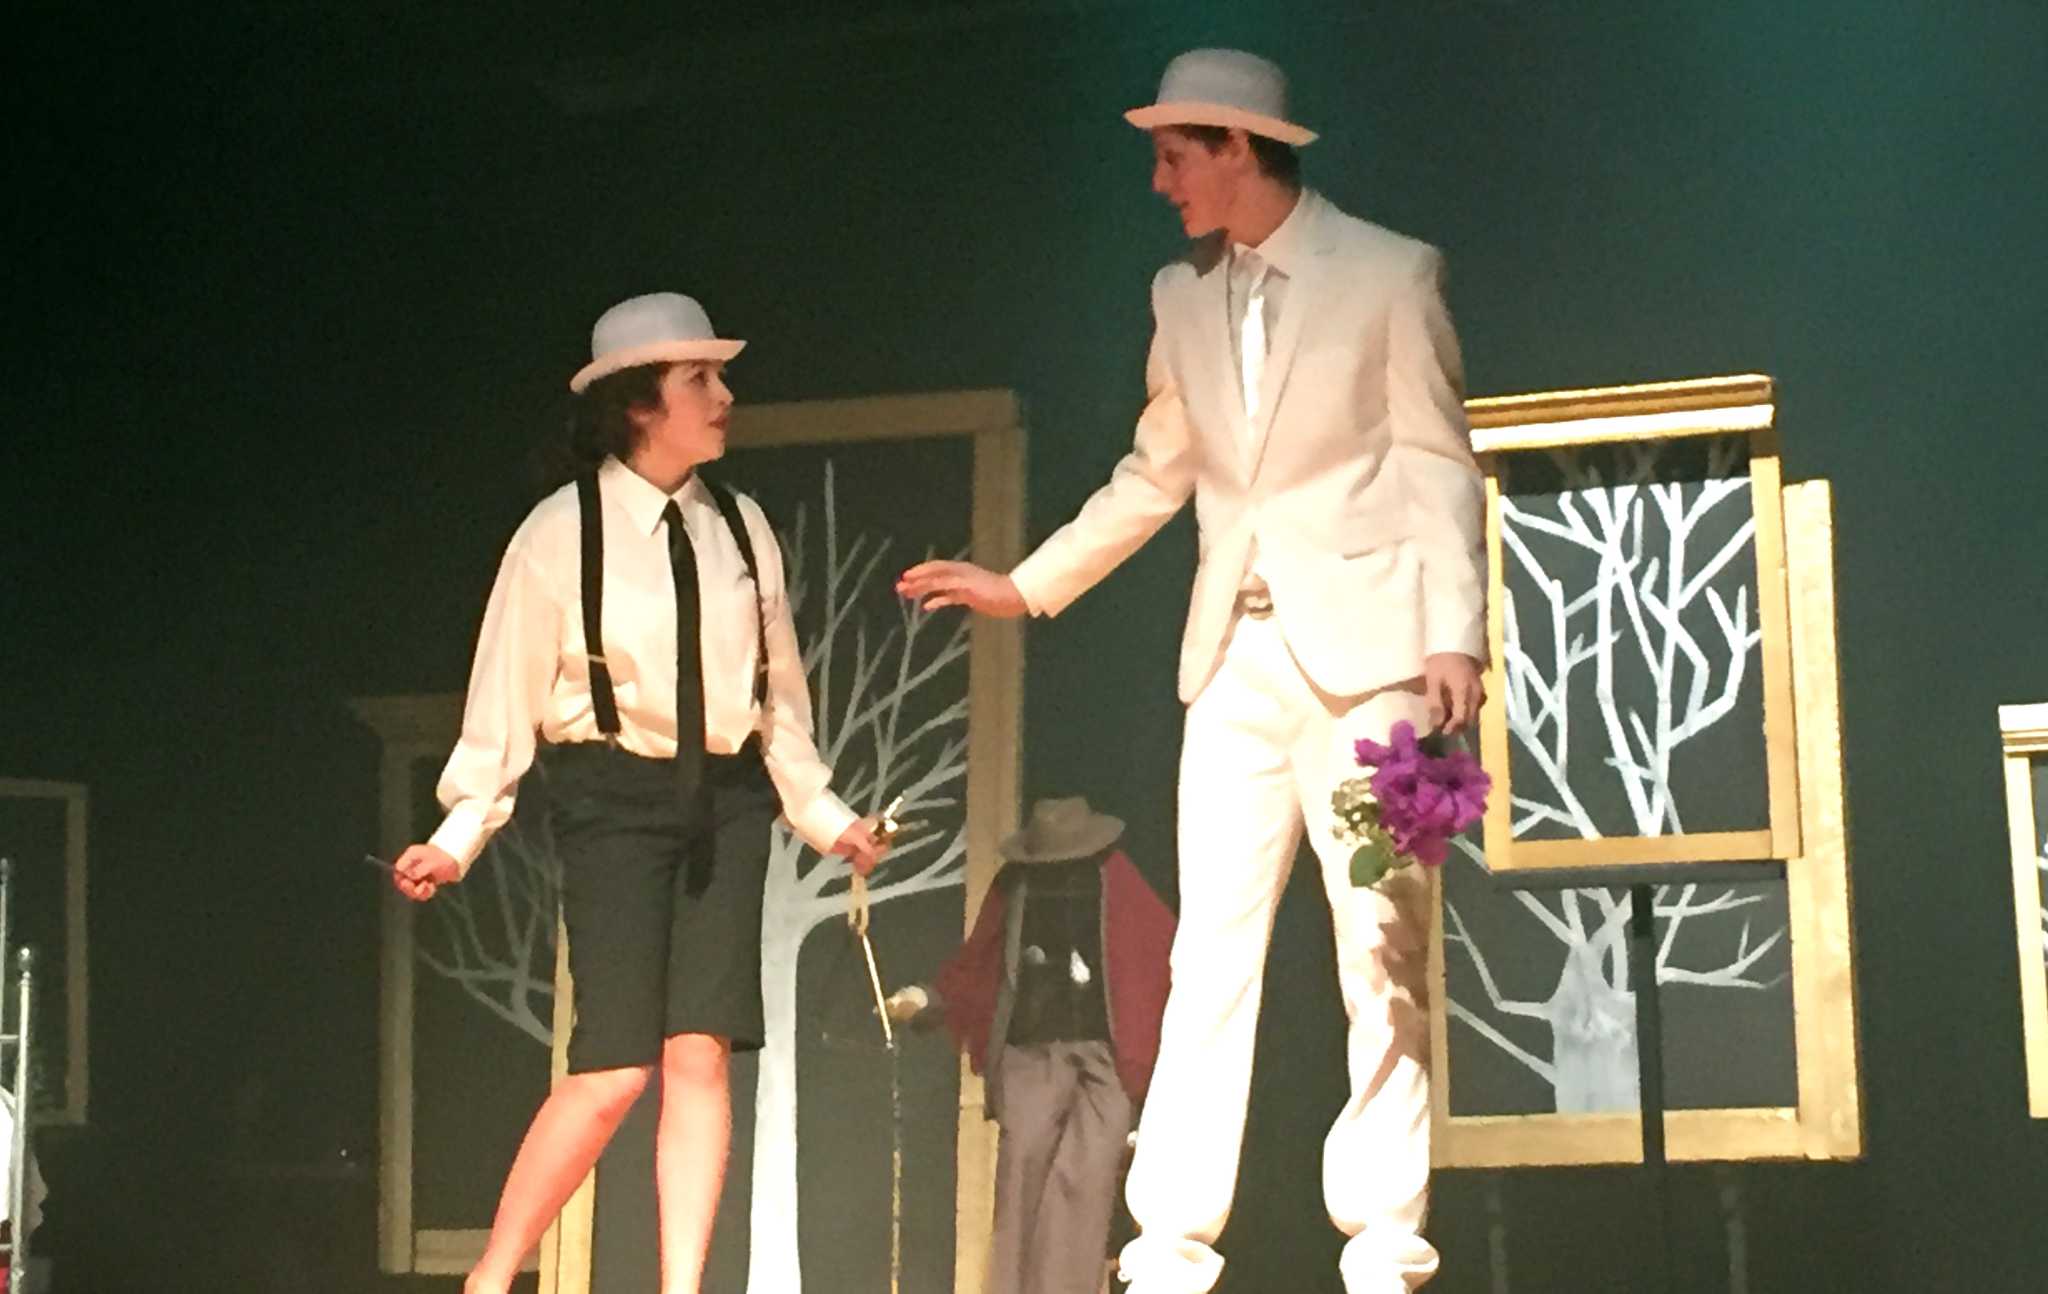 Pearland Junior High East triumphs in oneact play competition